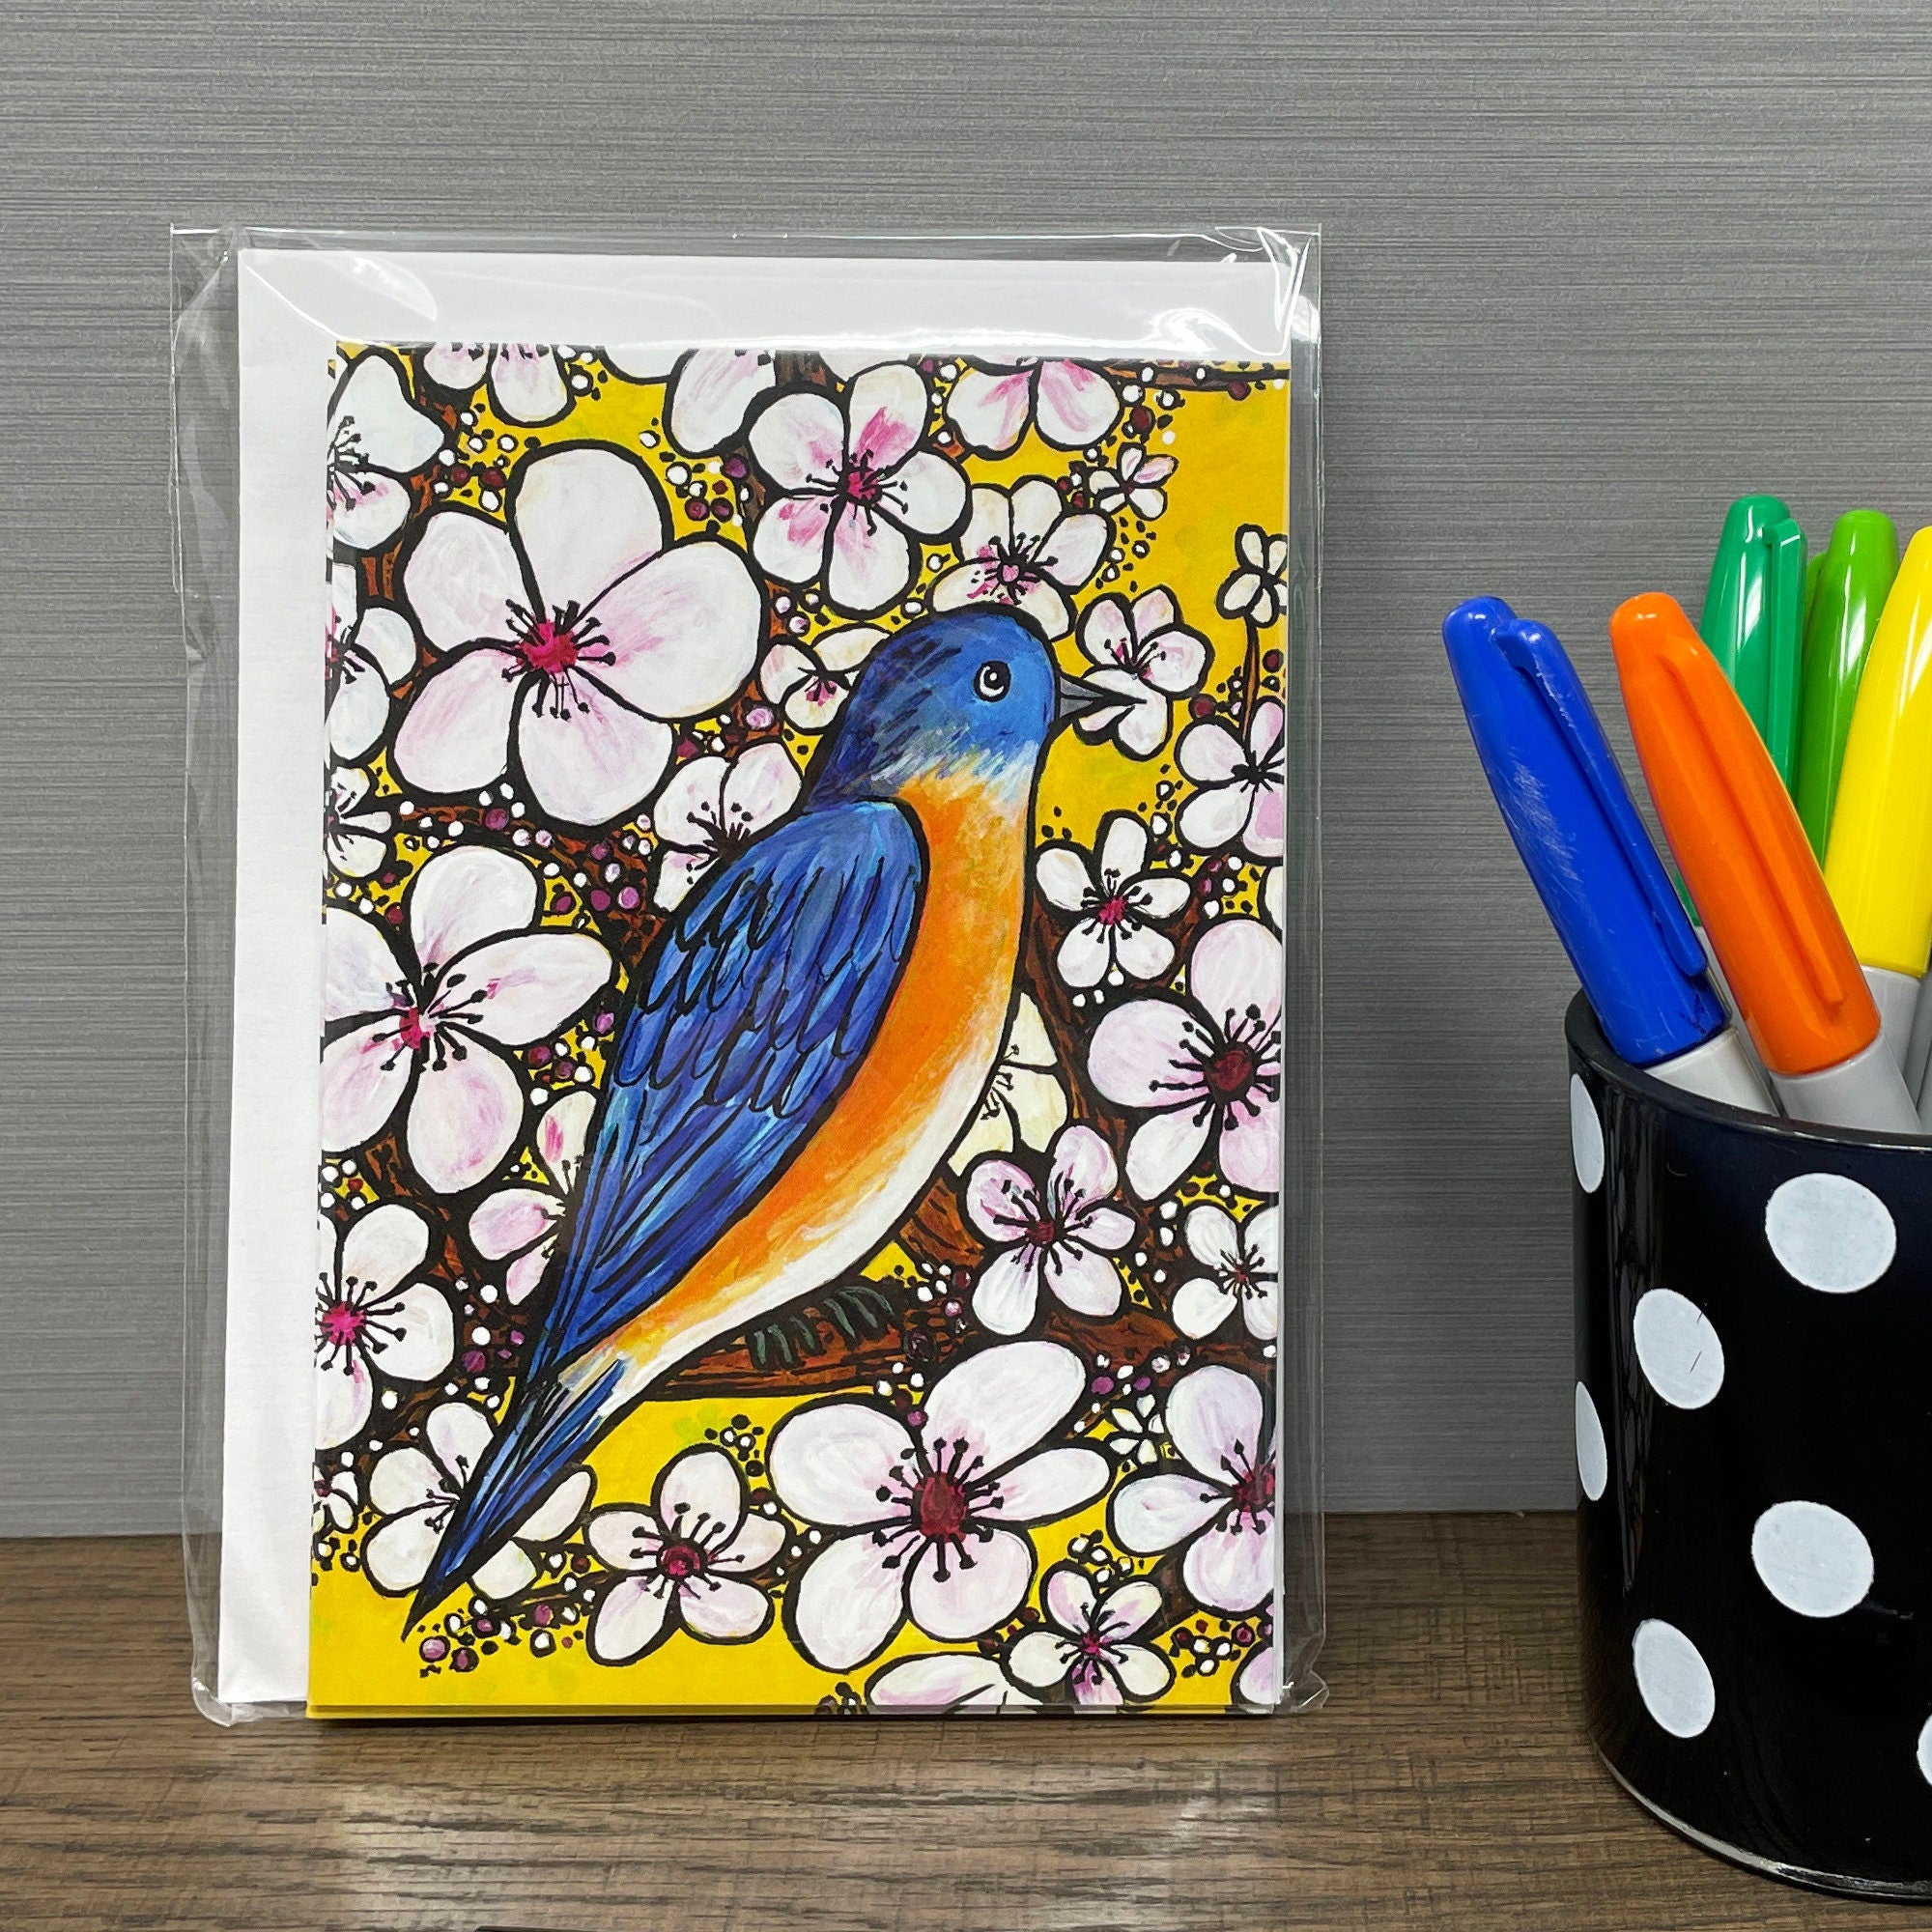 Bluebird Notecards with Envelopes Set - Blank Bird Note Cards for Thank You, Birthday, Wedding, Every Day, Any Occasion - Set of 4